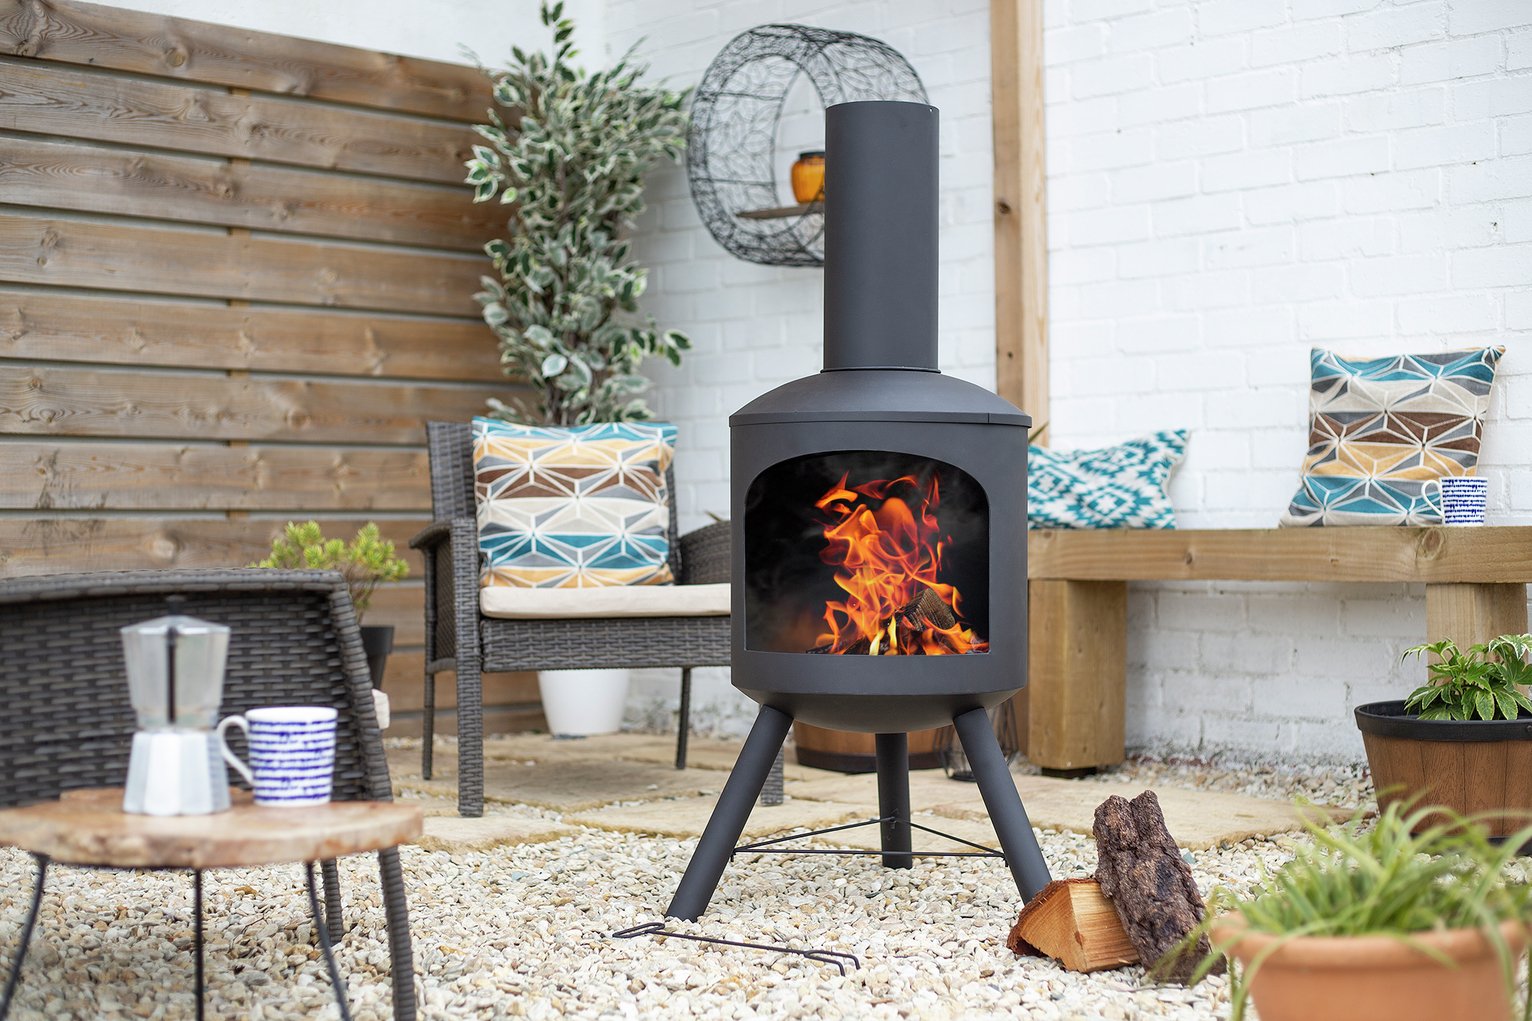 Best chimineas 2021: clay, steel, and cast iron chimineas | Gardeningetc